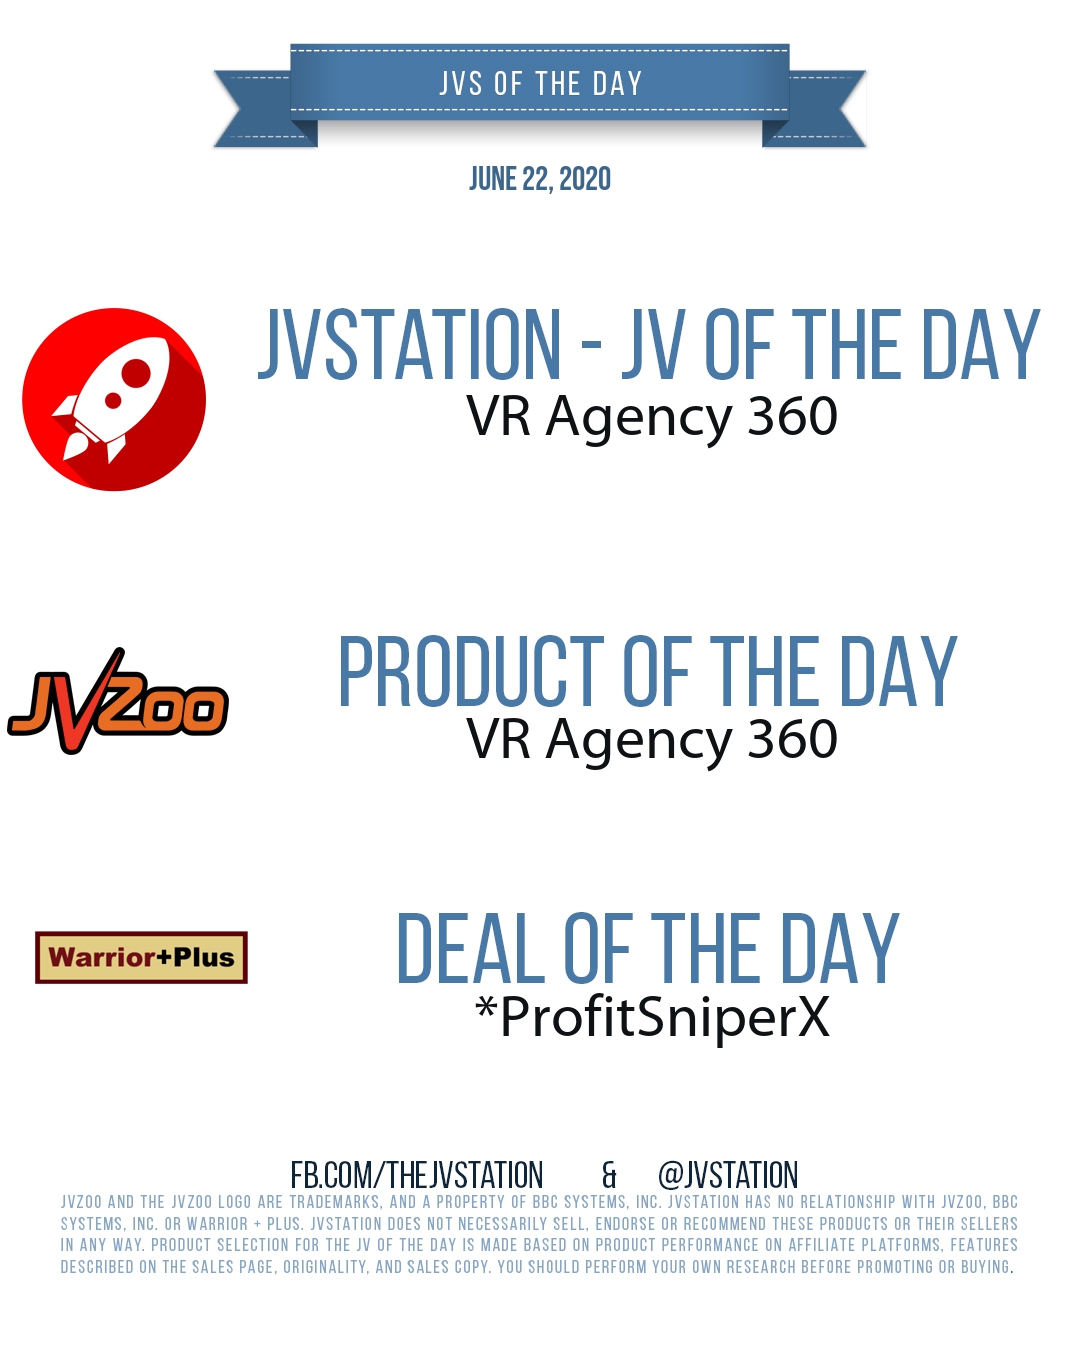 JVs of the day - June 22, 2020